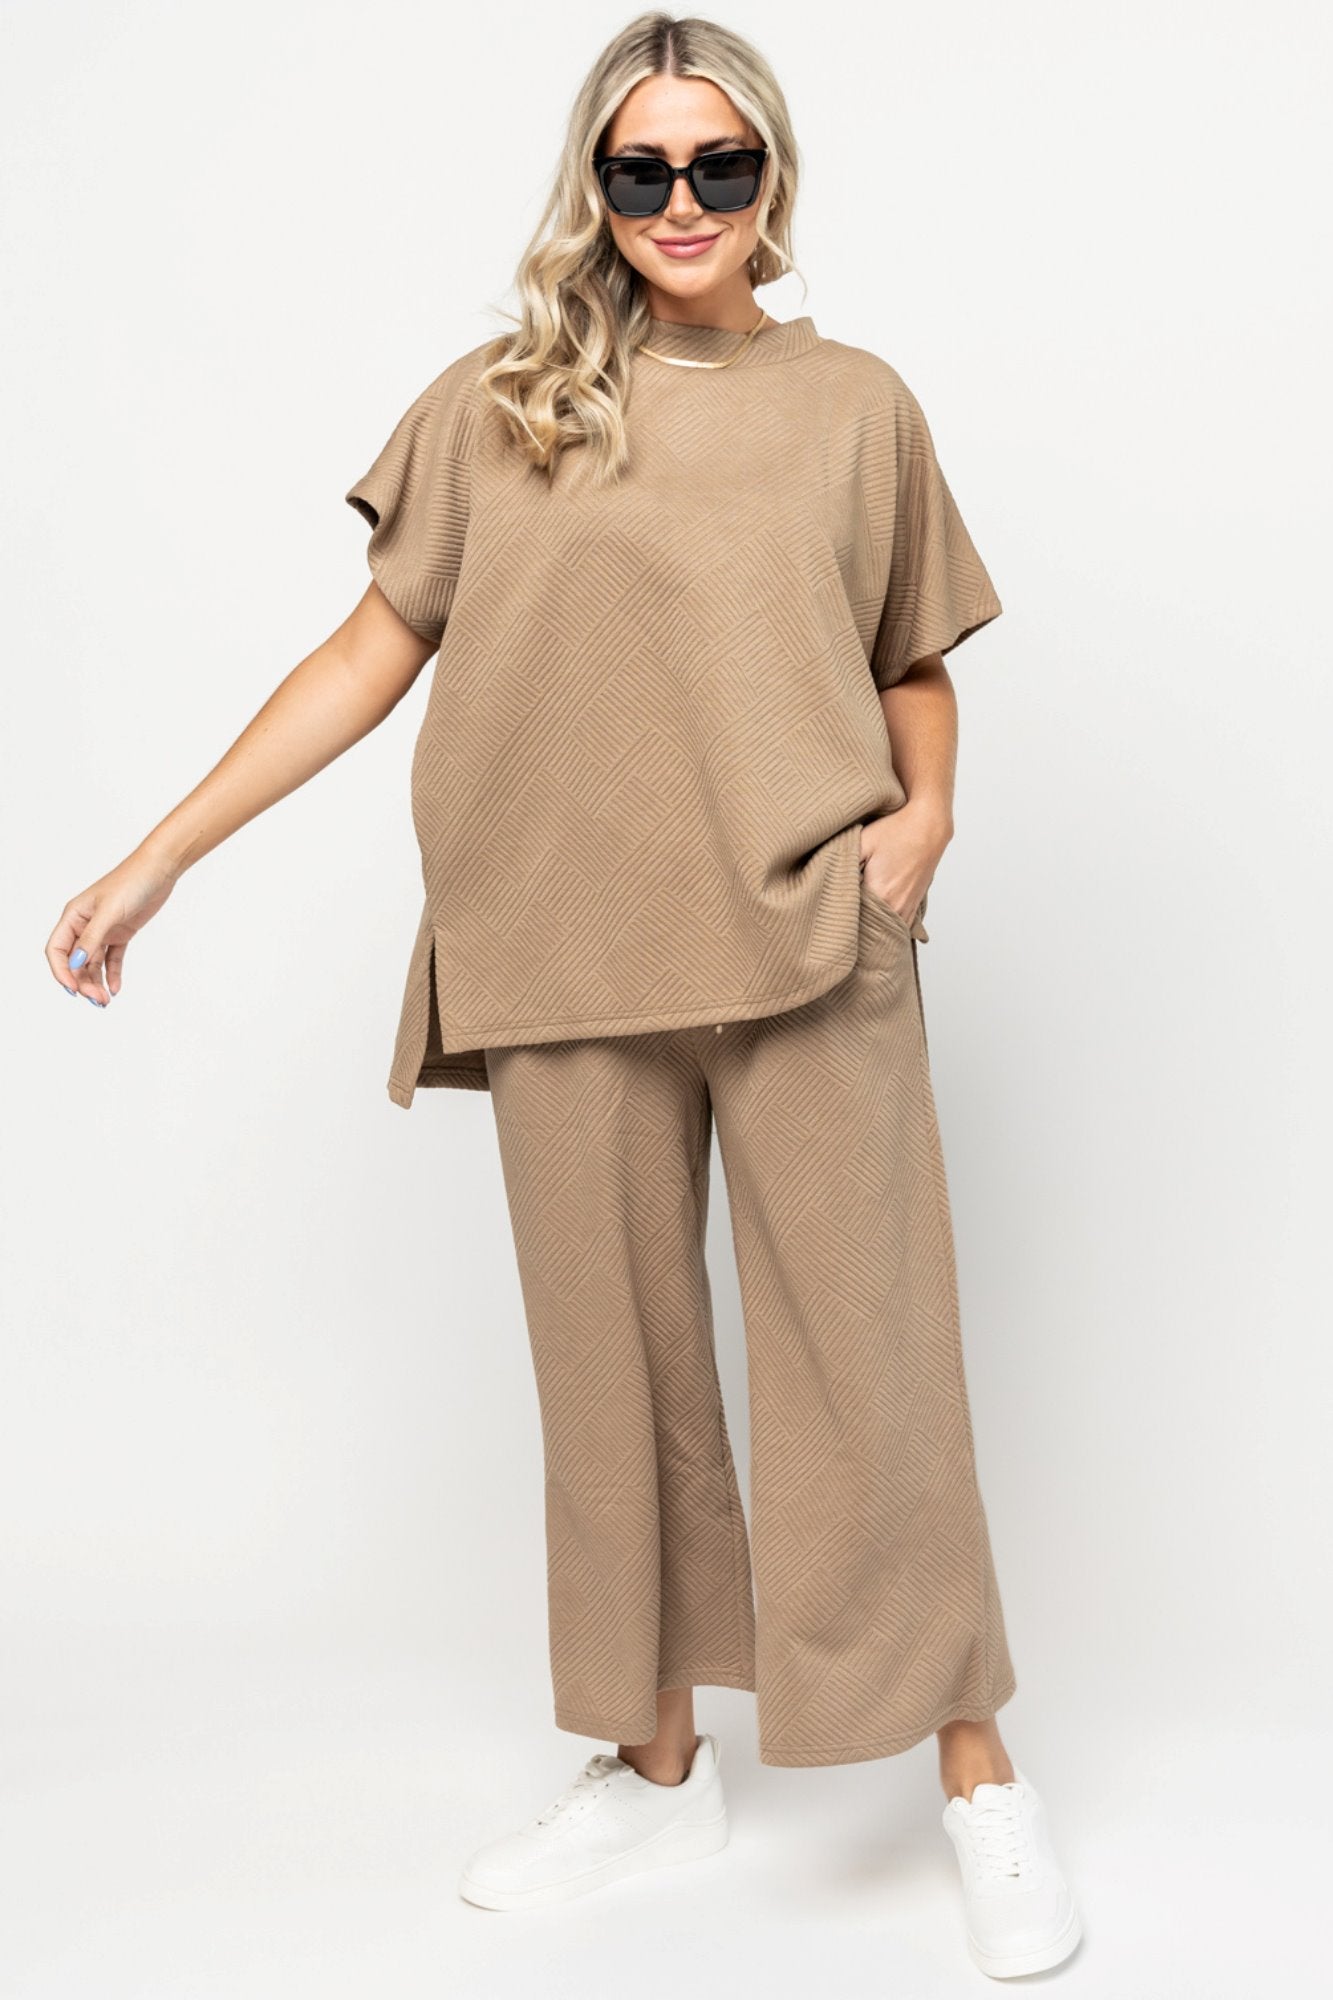 Addison Top in Sand Holley Girl 